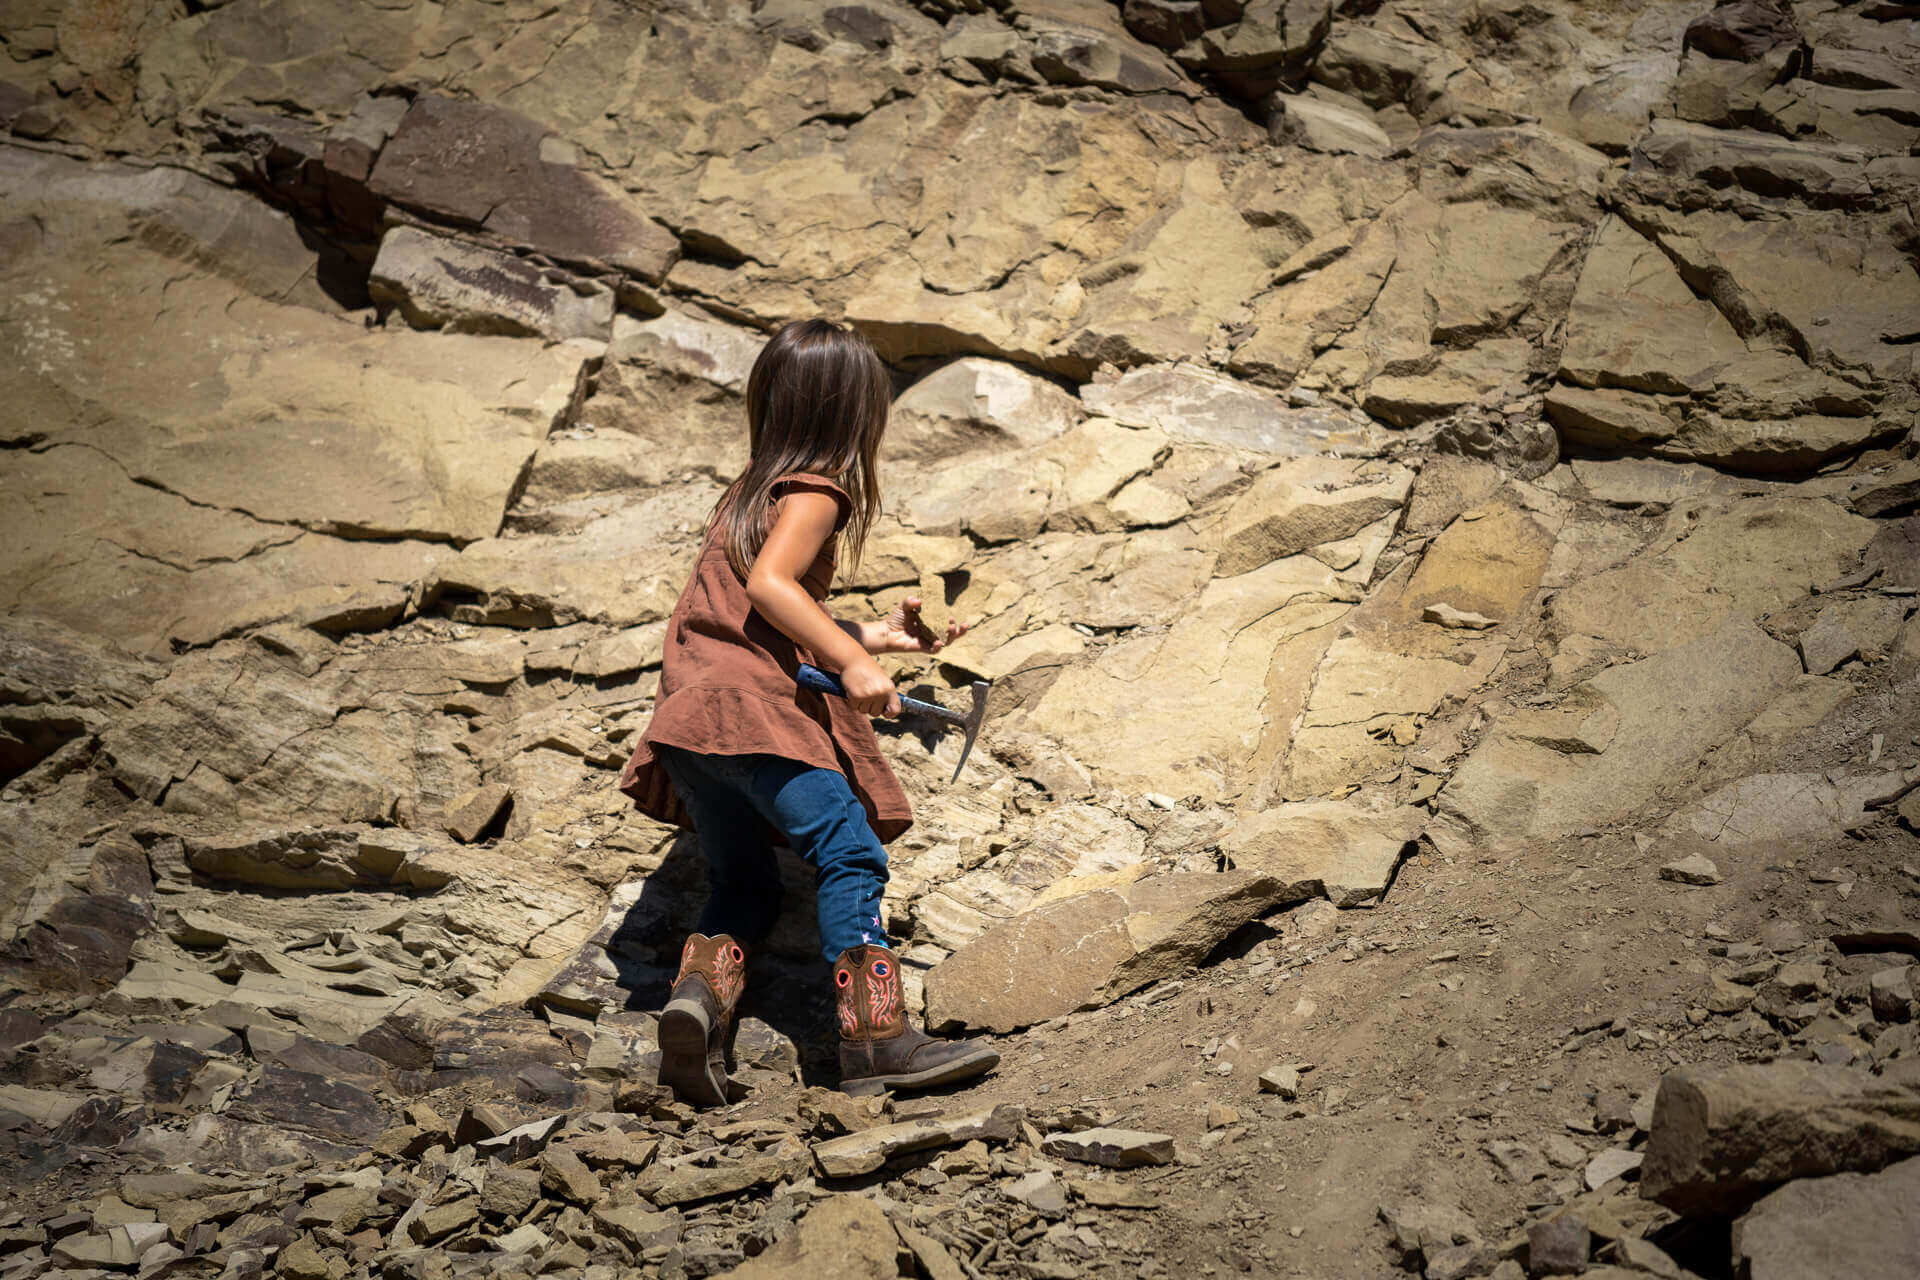 A young girl chips away at a rock face while digging for fossils in Washington, one of many things to do with kids.